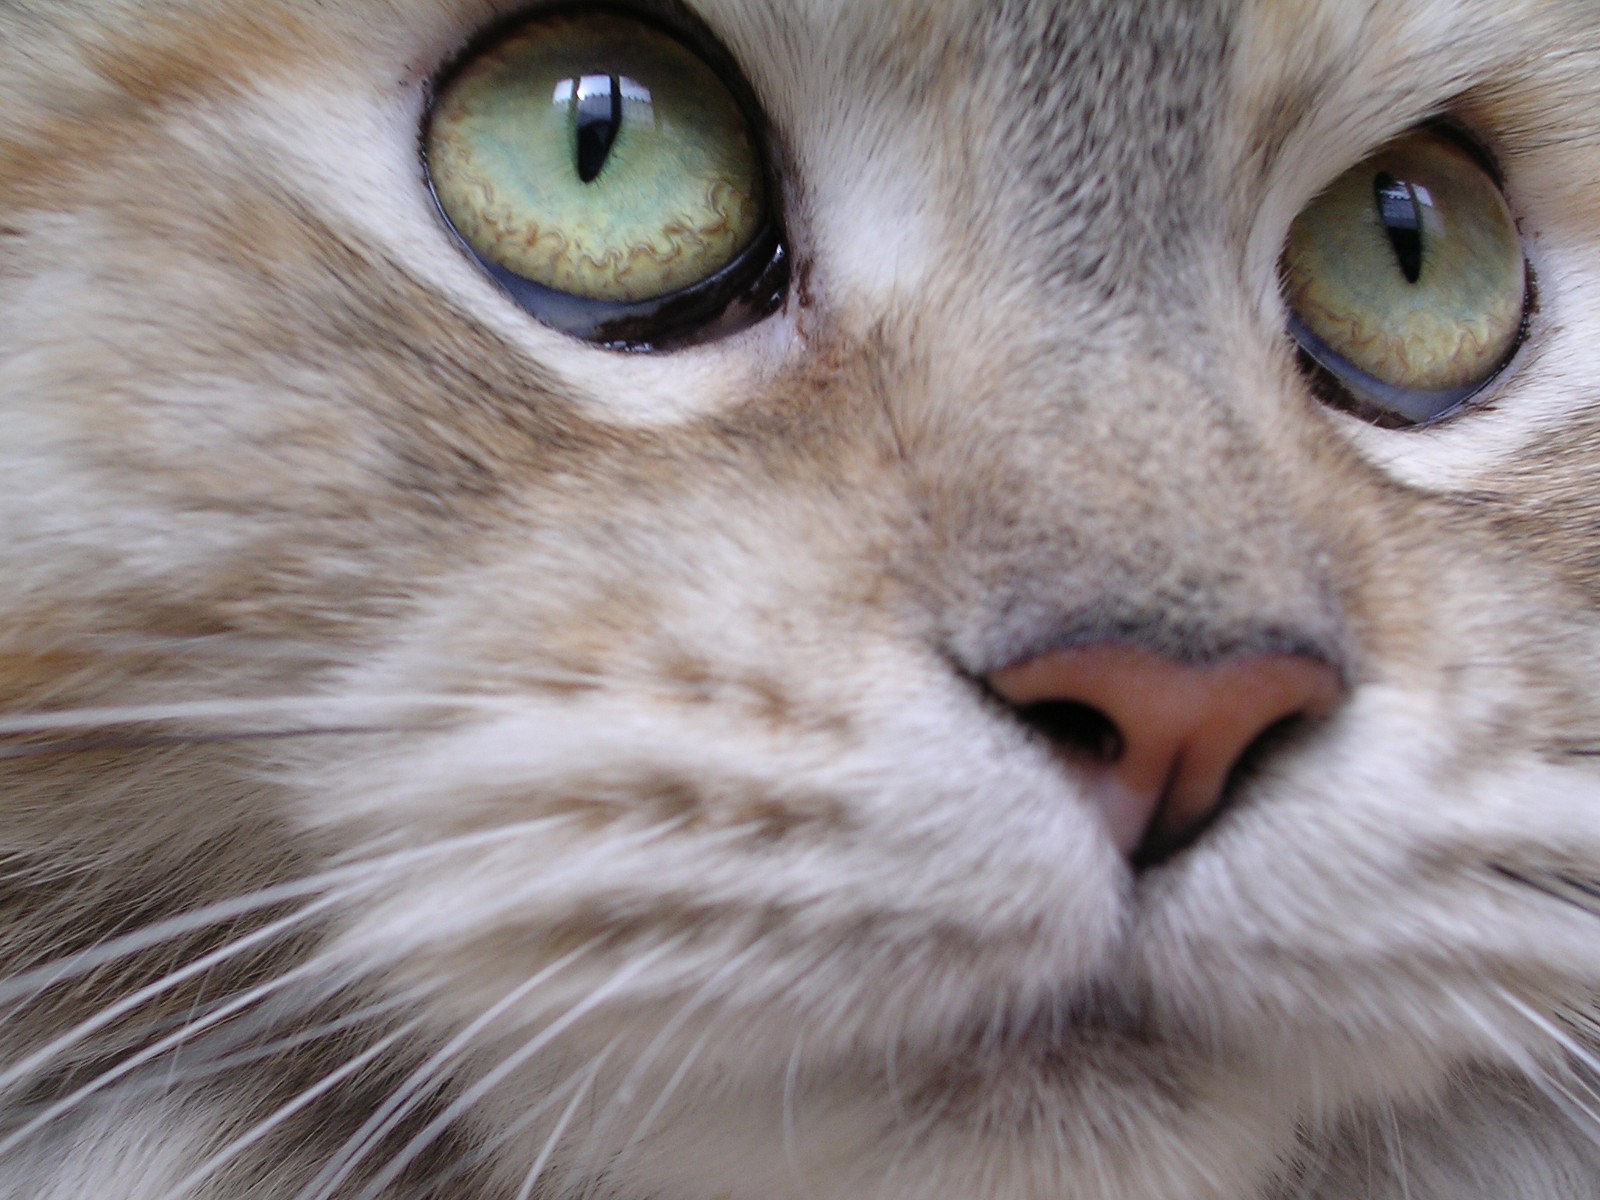 Maine Coon cat close-up wallpapers and images - wallpapers, pictures ...